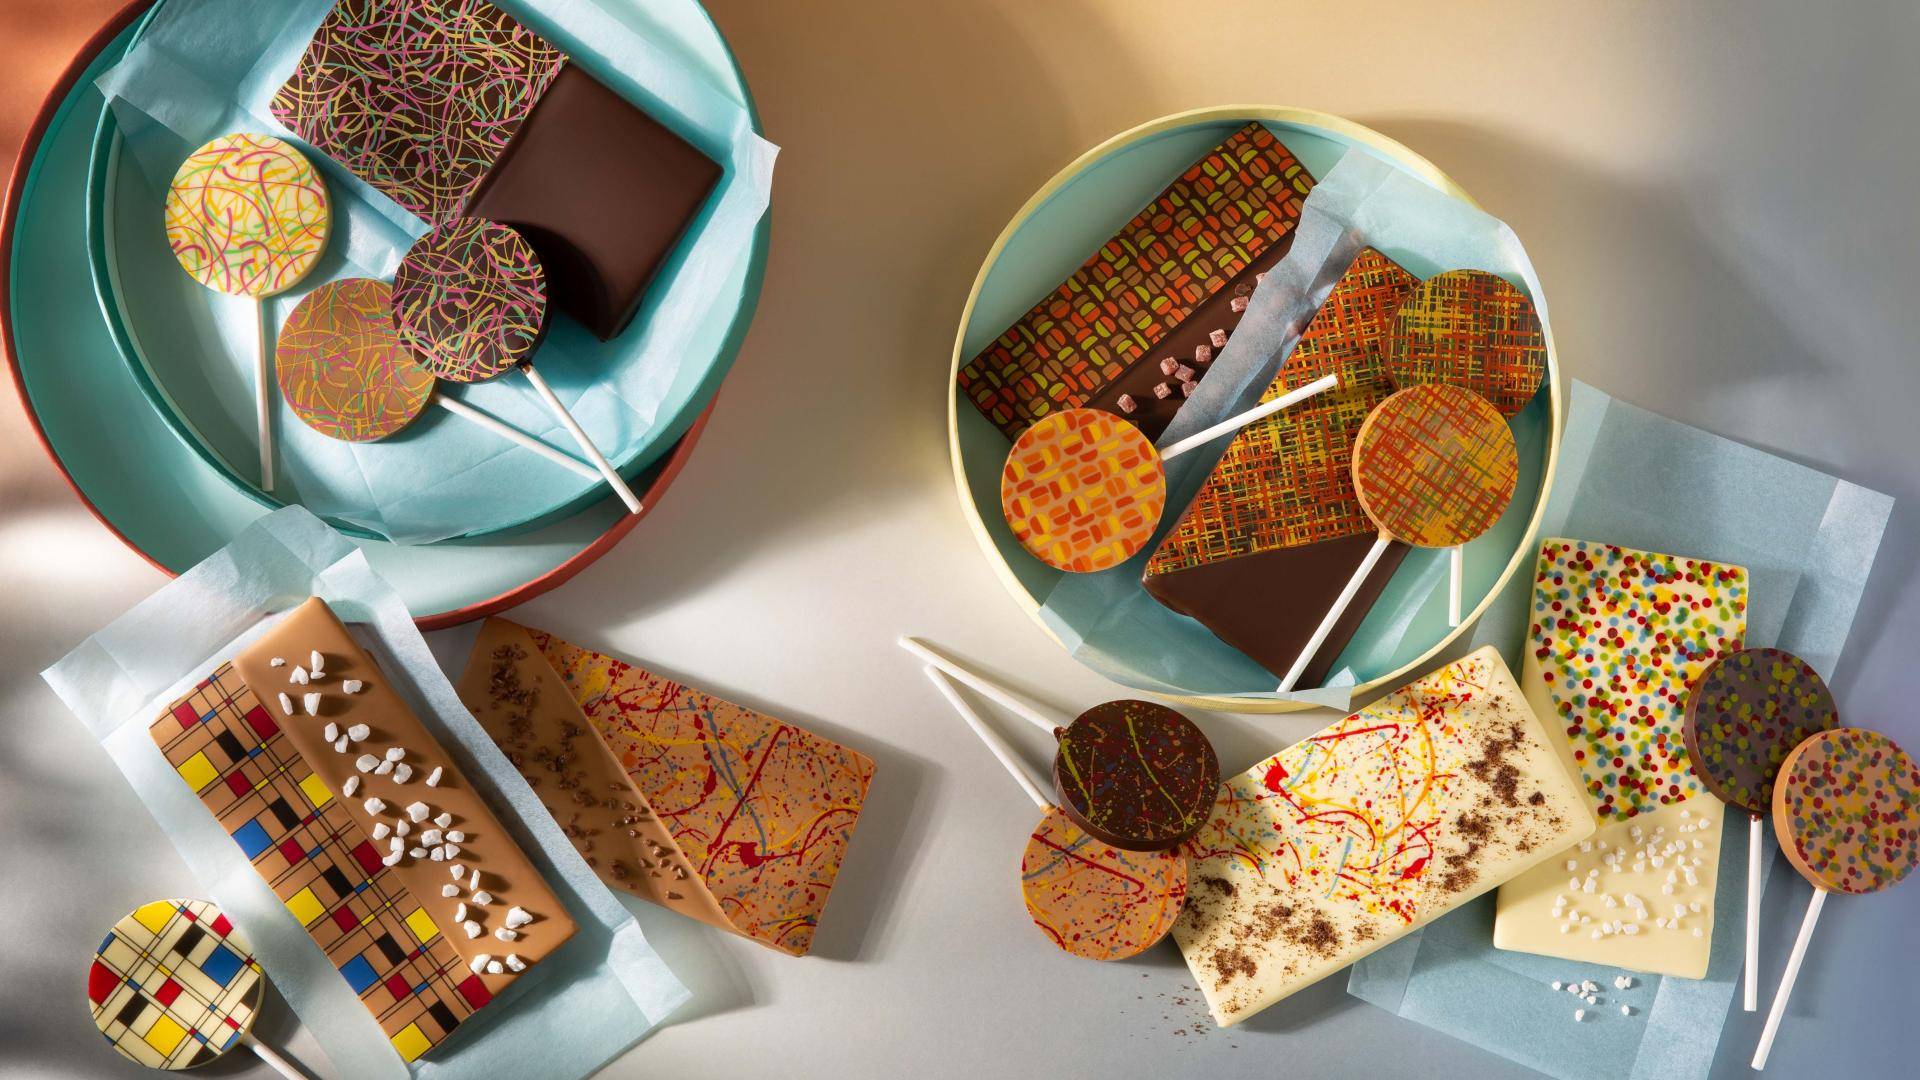 Chocolate tablets and lollipops decorated with transfers and sprinkles